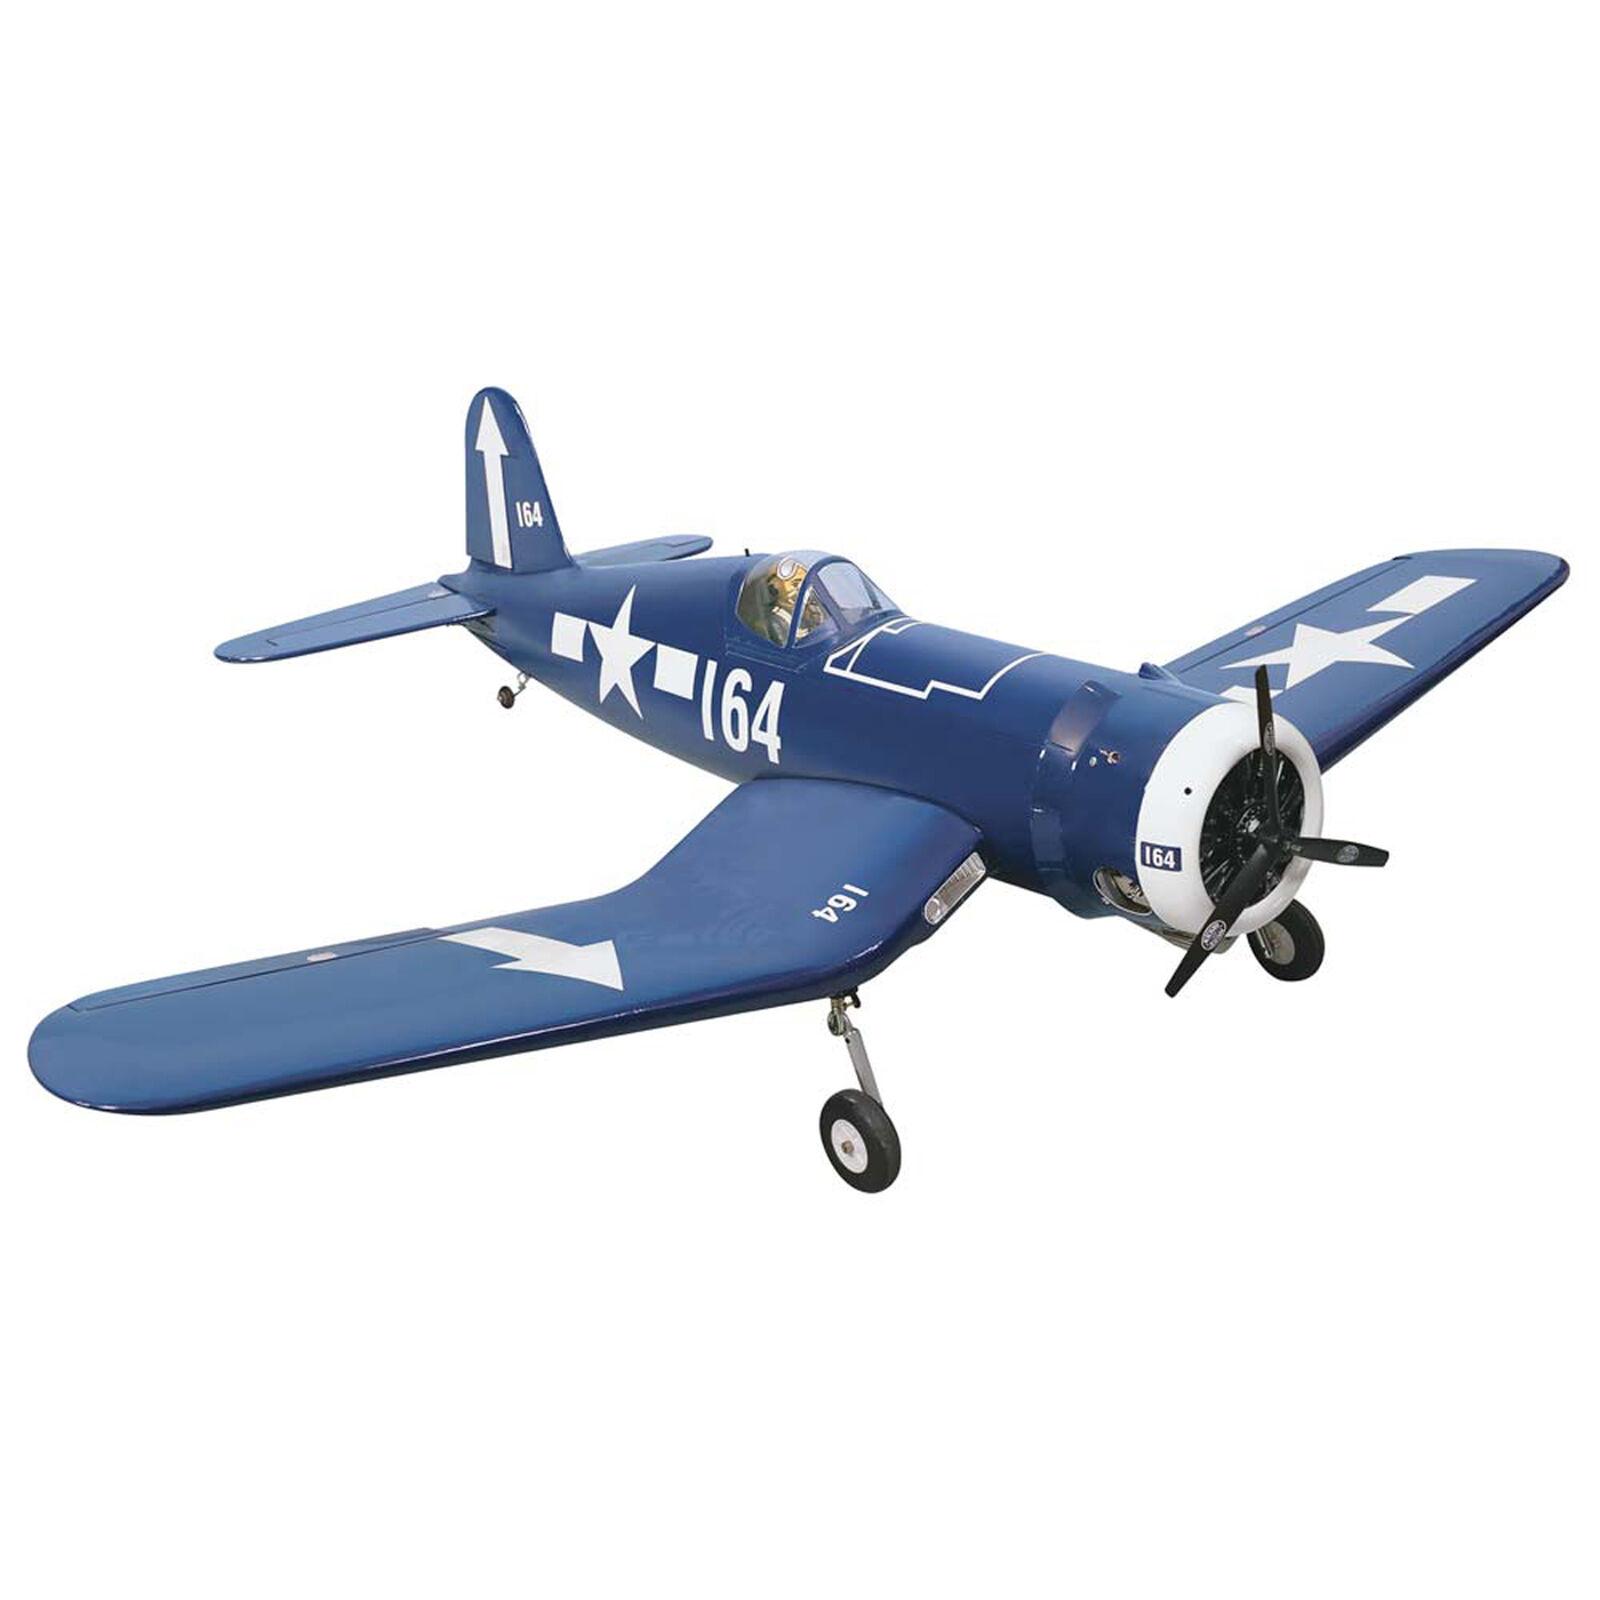 F4U Corsair For Sale Rc: F4U Corsair RC: History, Features, and Where to Find Them Today